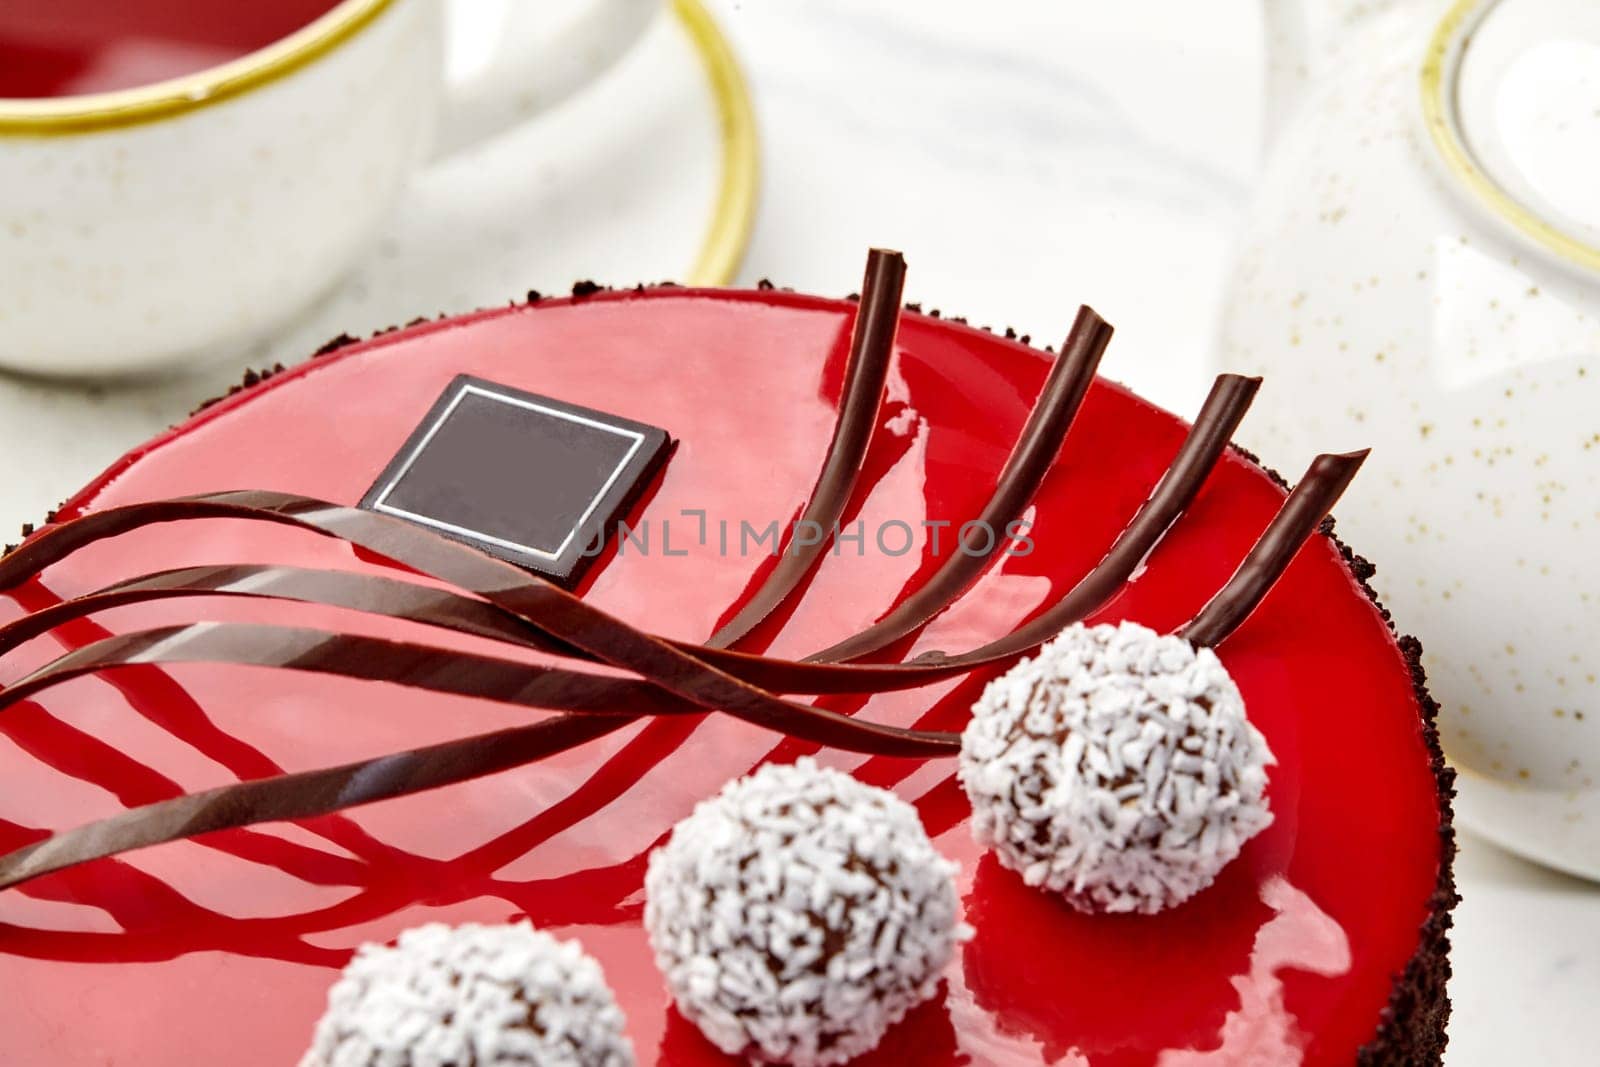 Closeup of artfully decorated cake with red mirror glaze, glossy dark chocolate swirls and white coconut truffles served with tea for special occasion